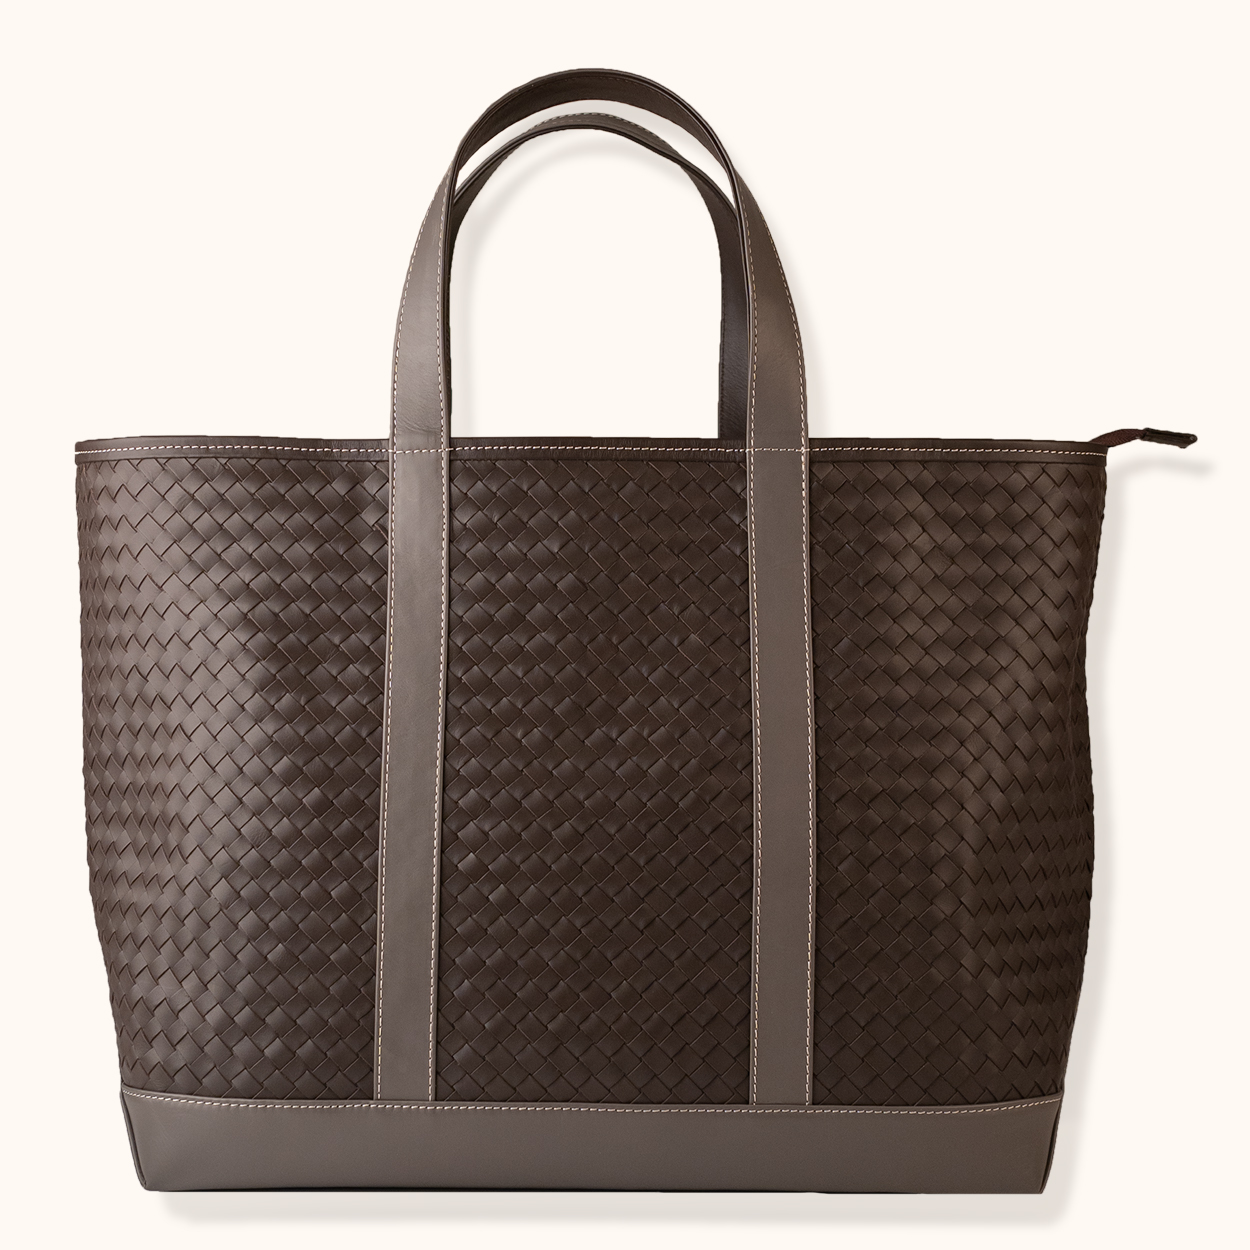 The Boss Tote Chocoate and London Boss (Square)